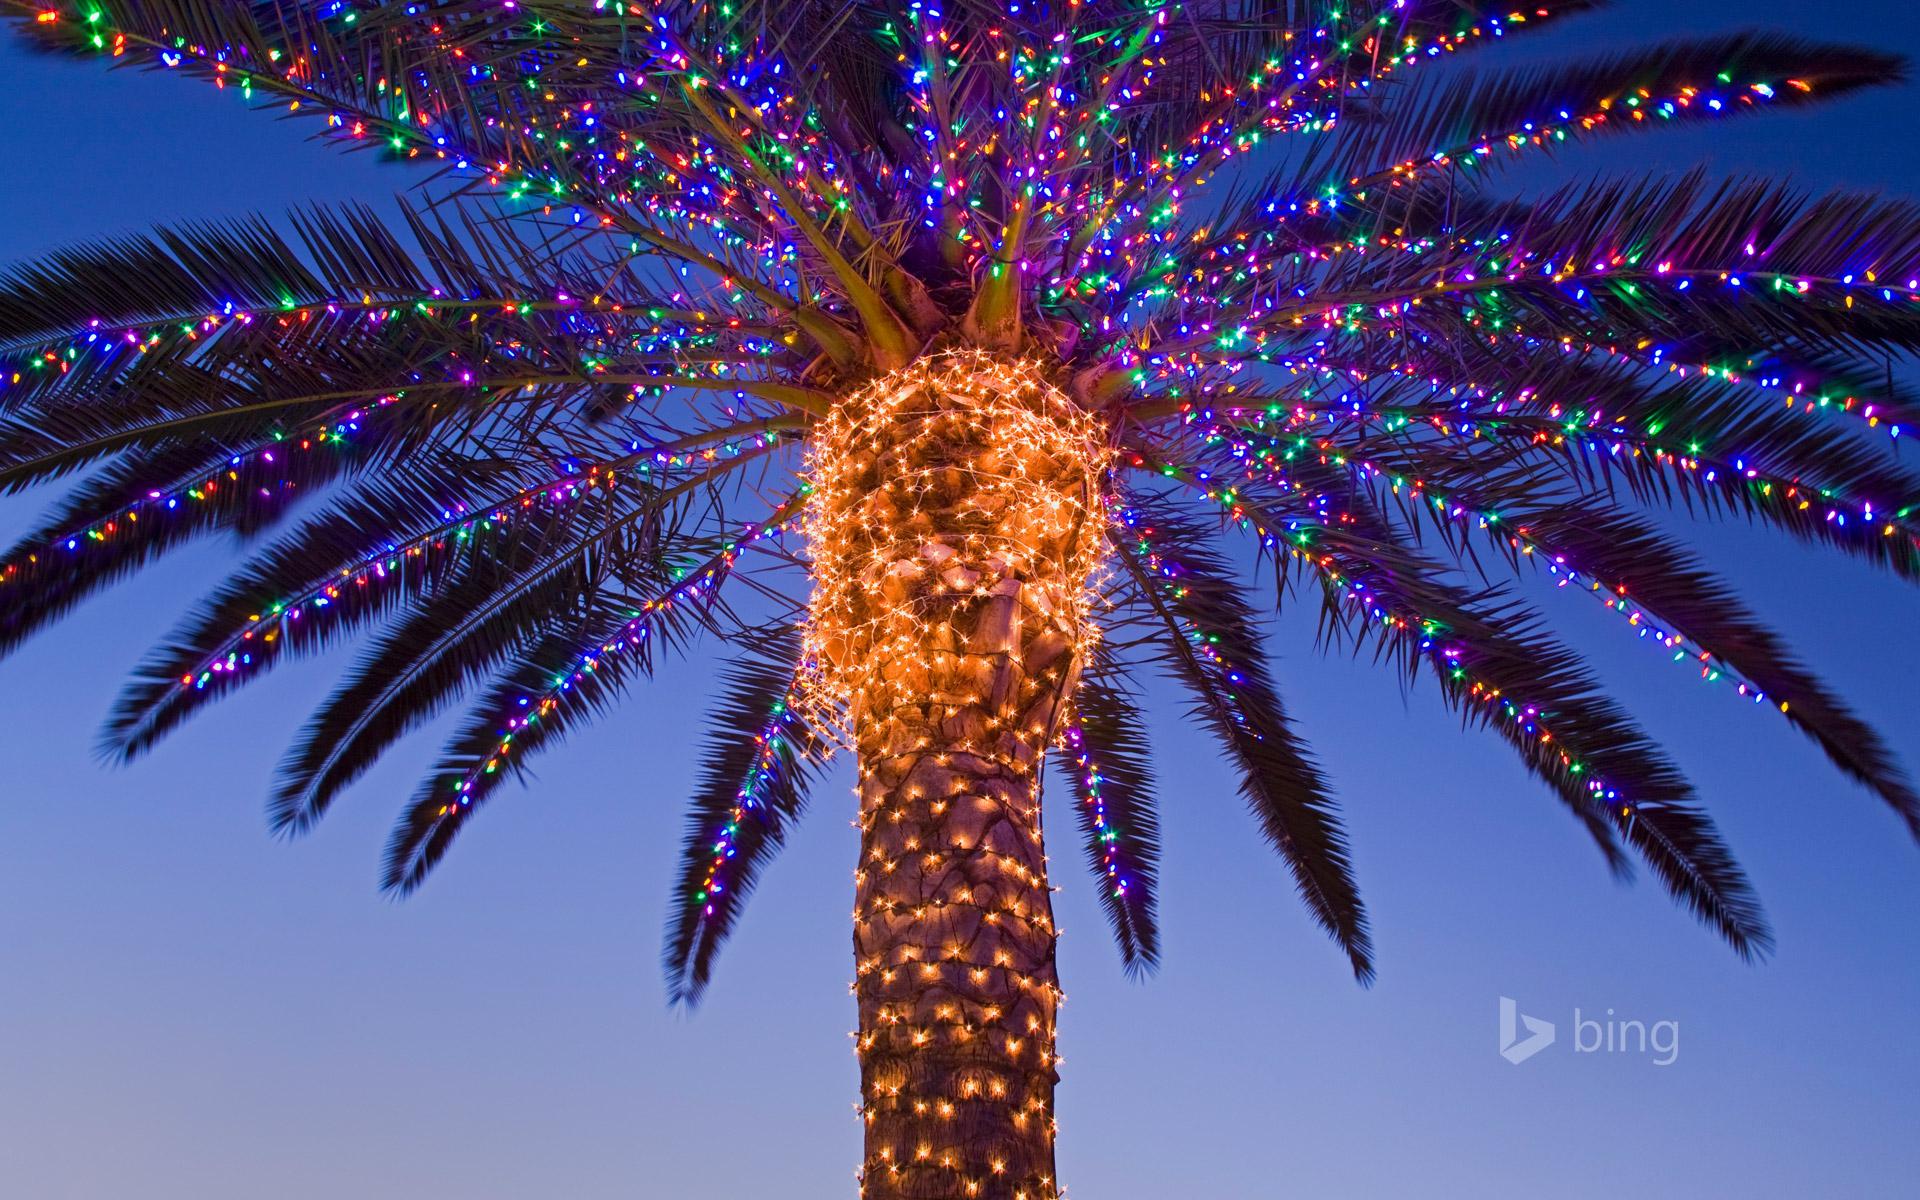 Christmas lights in a palm tree at a winery, Temecula Valley